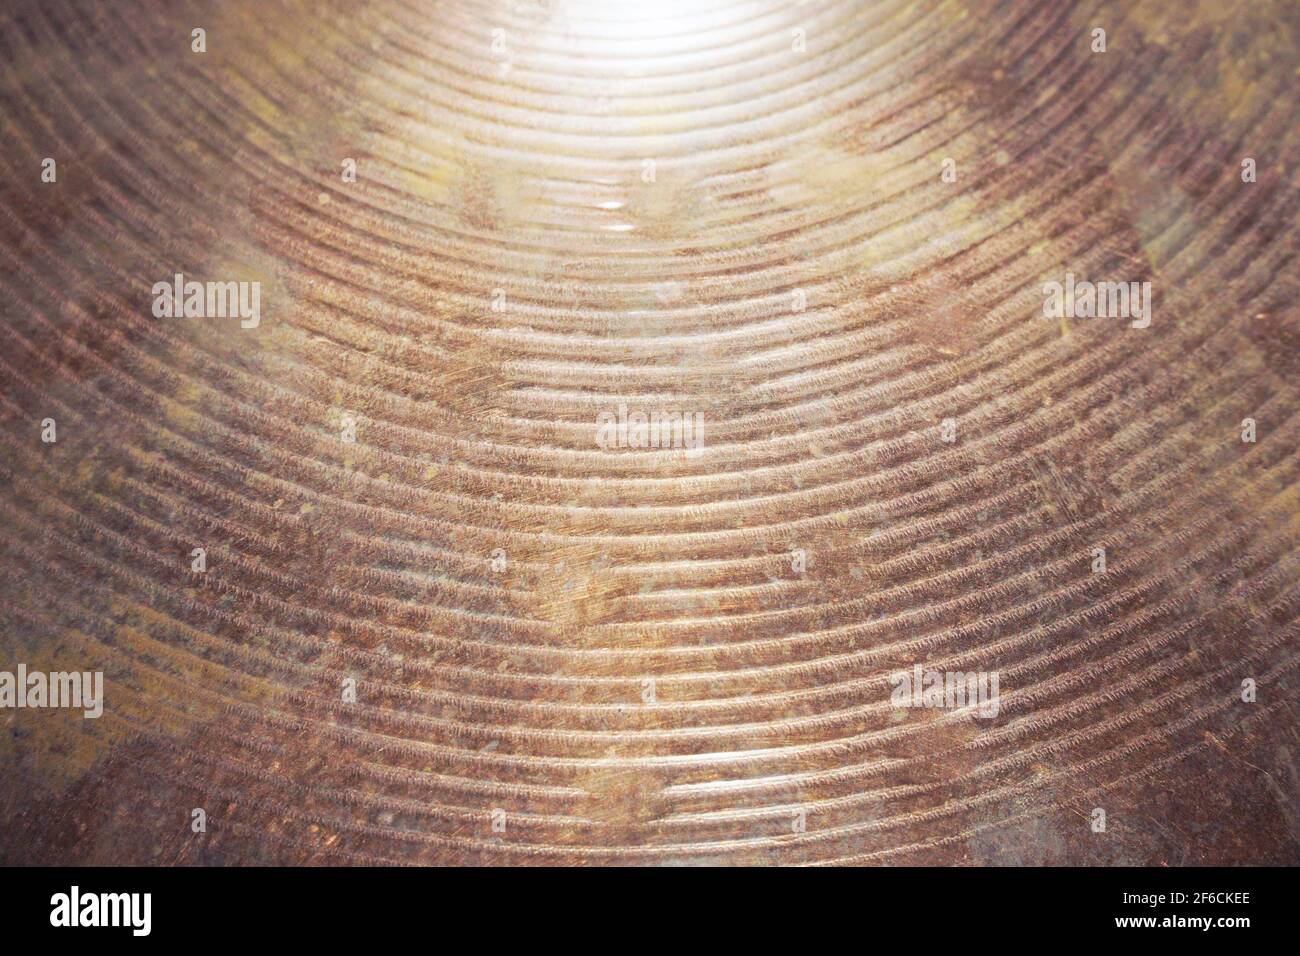 Old drum cymbal surface texture for background and design Stock Photo